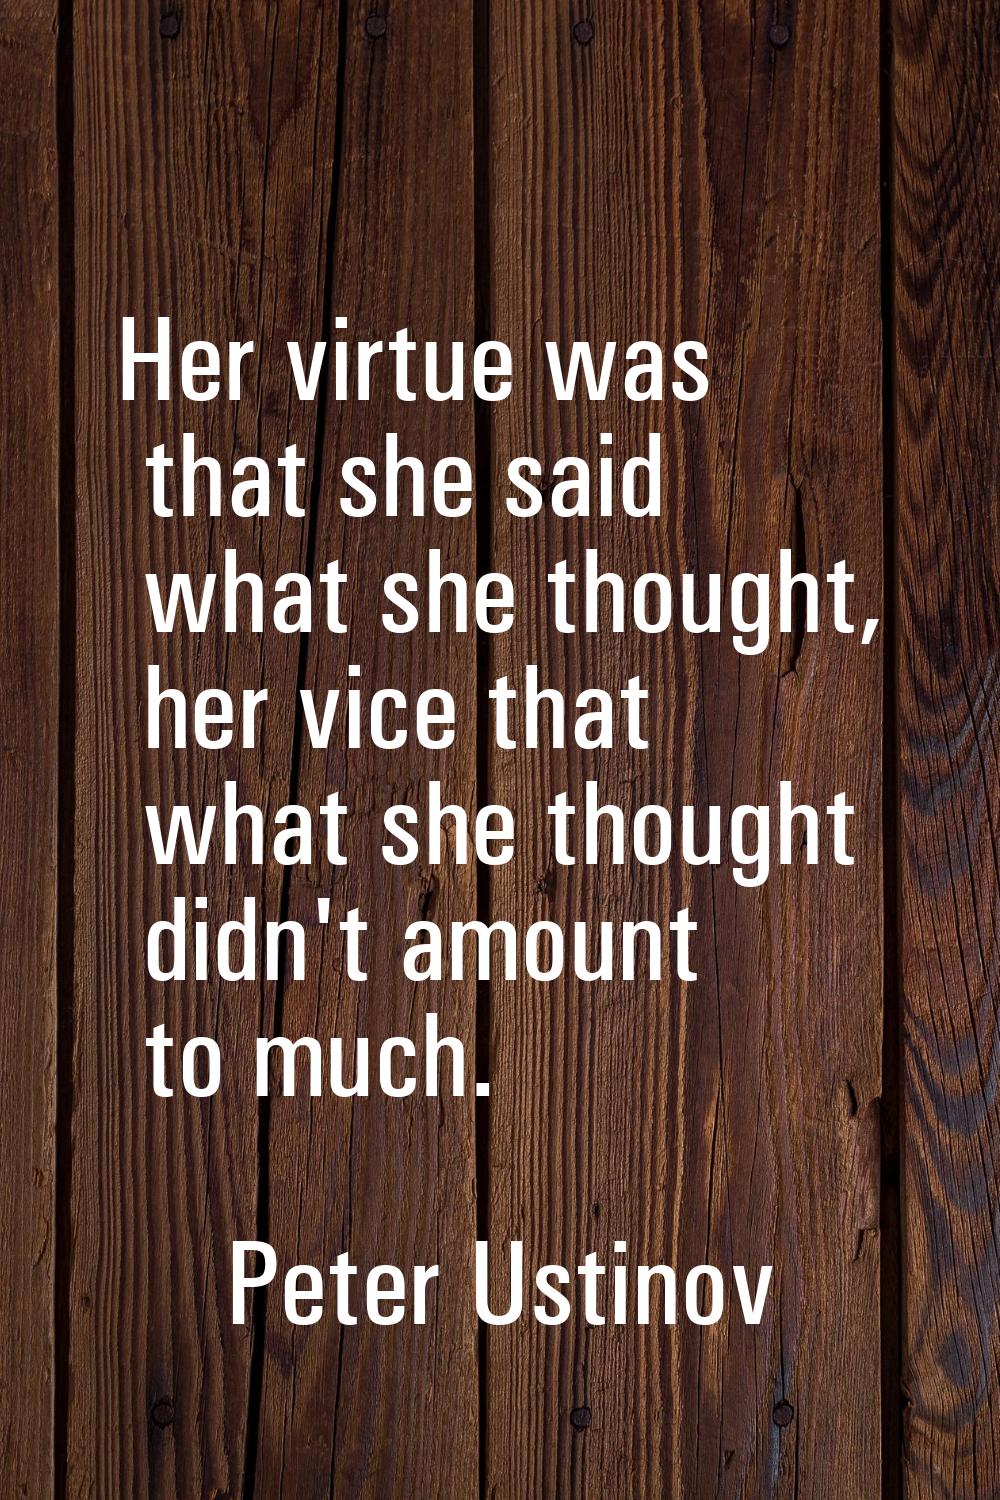 Her virtue was that she said what she thought, her vice that what she thought didn't amount to much